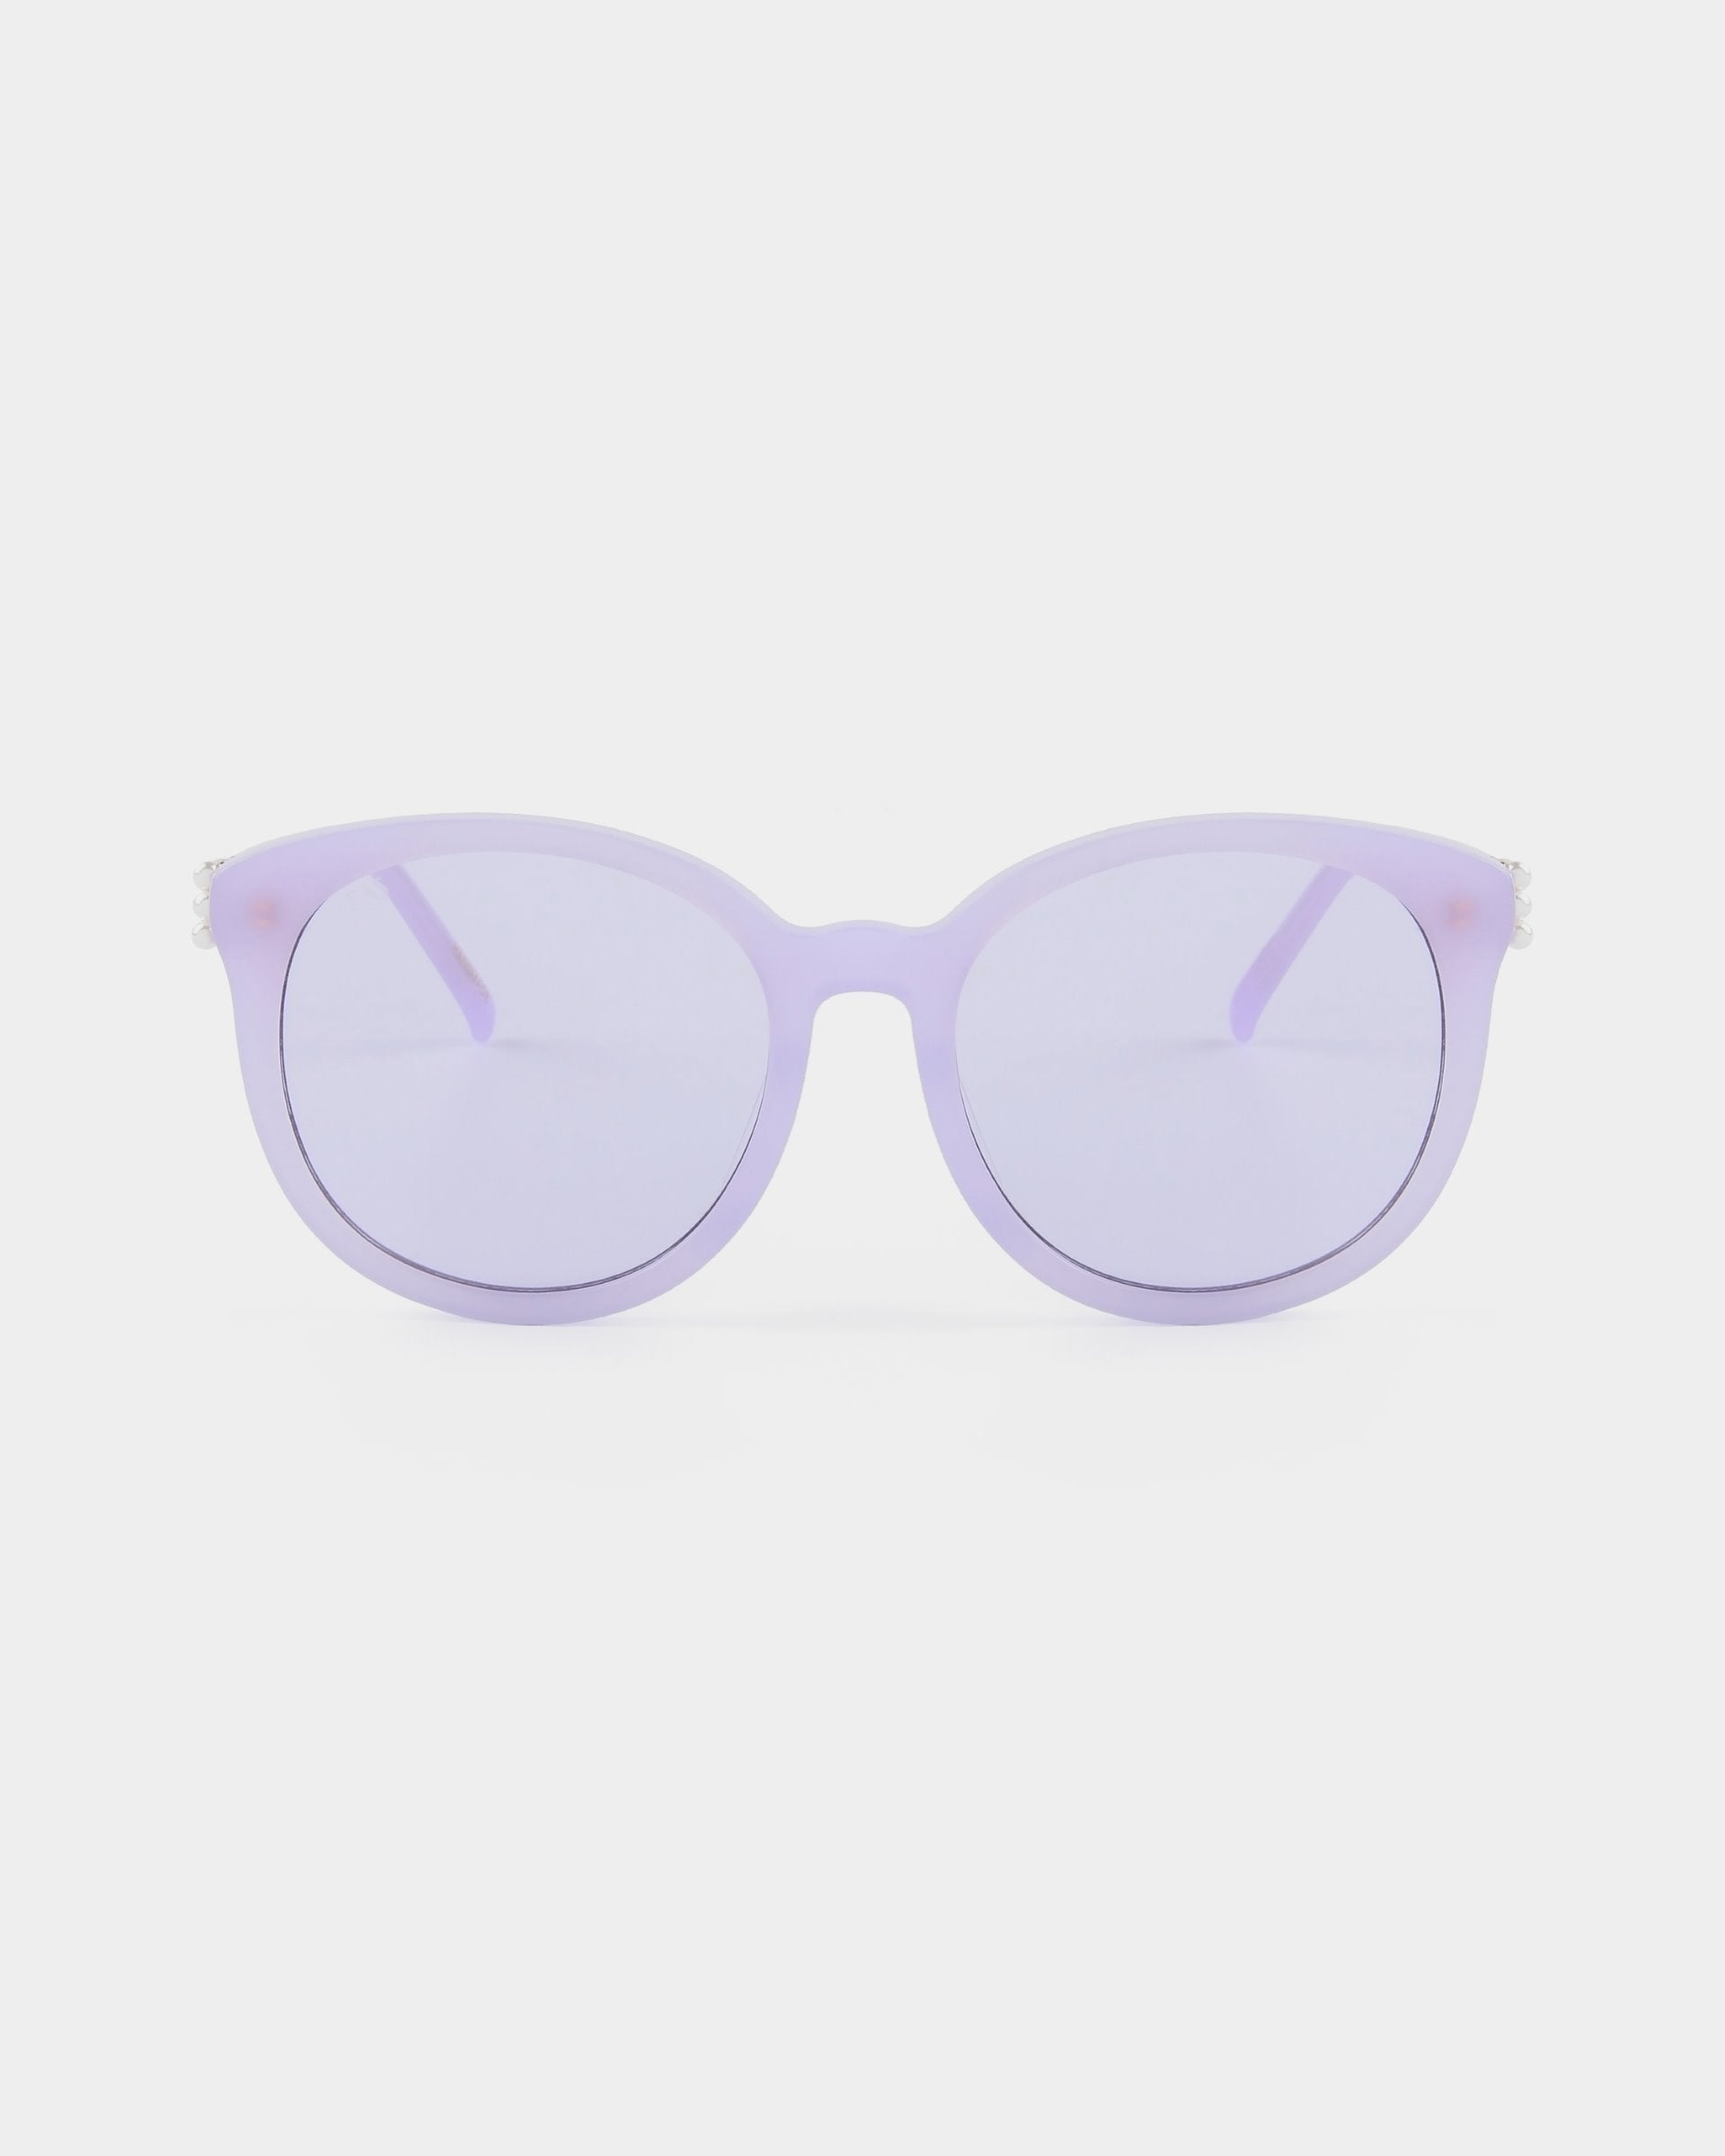 A pair of rounded lavender Scarlett sunglasses from For Art&#39;s Sake® with lightly tinted purple lenses against a white background. The frames are solid-colored, and the temples appear to be the same shade of lavender. Featuring ultralightweight shatter-resistant lenses, these sunglasses provide 100% UVA &amp; UVB protection.